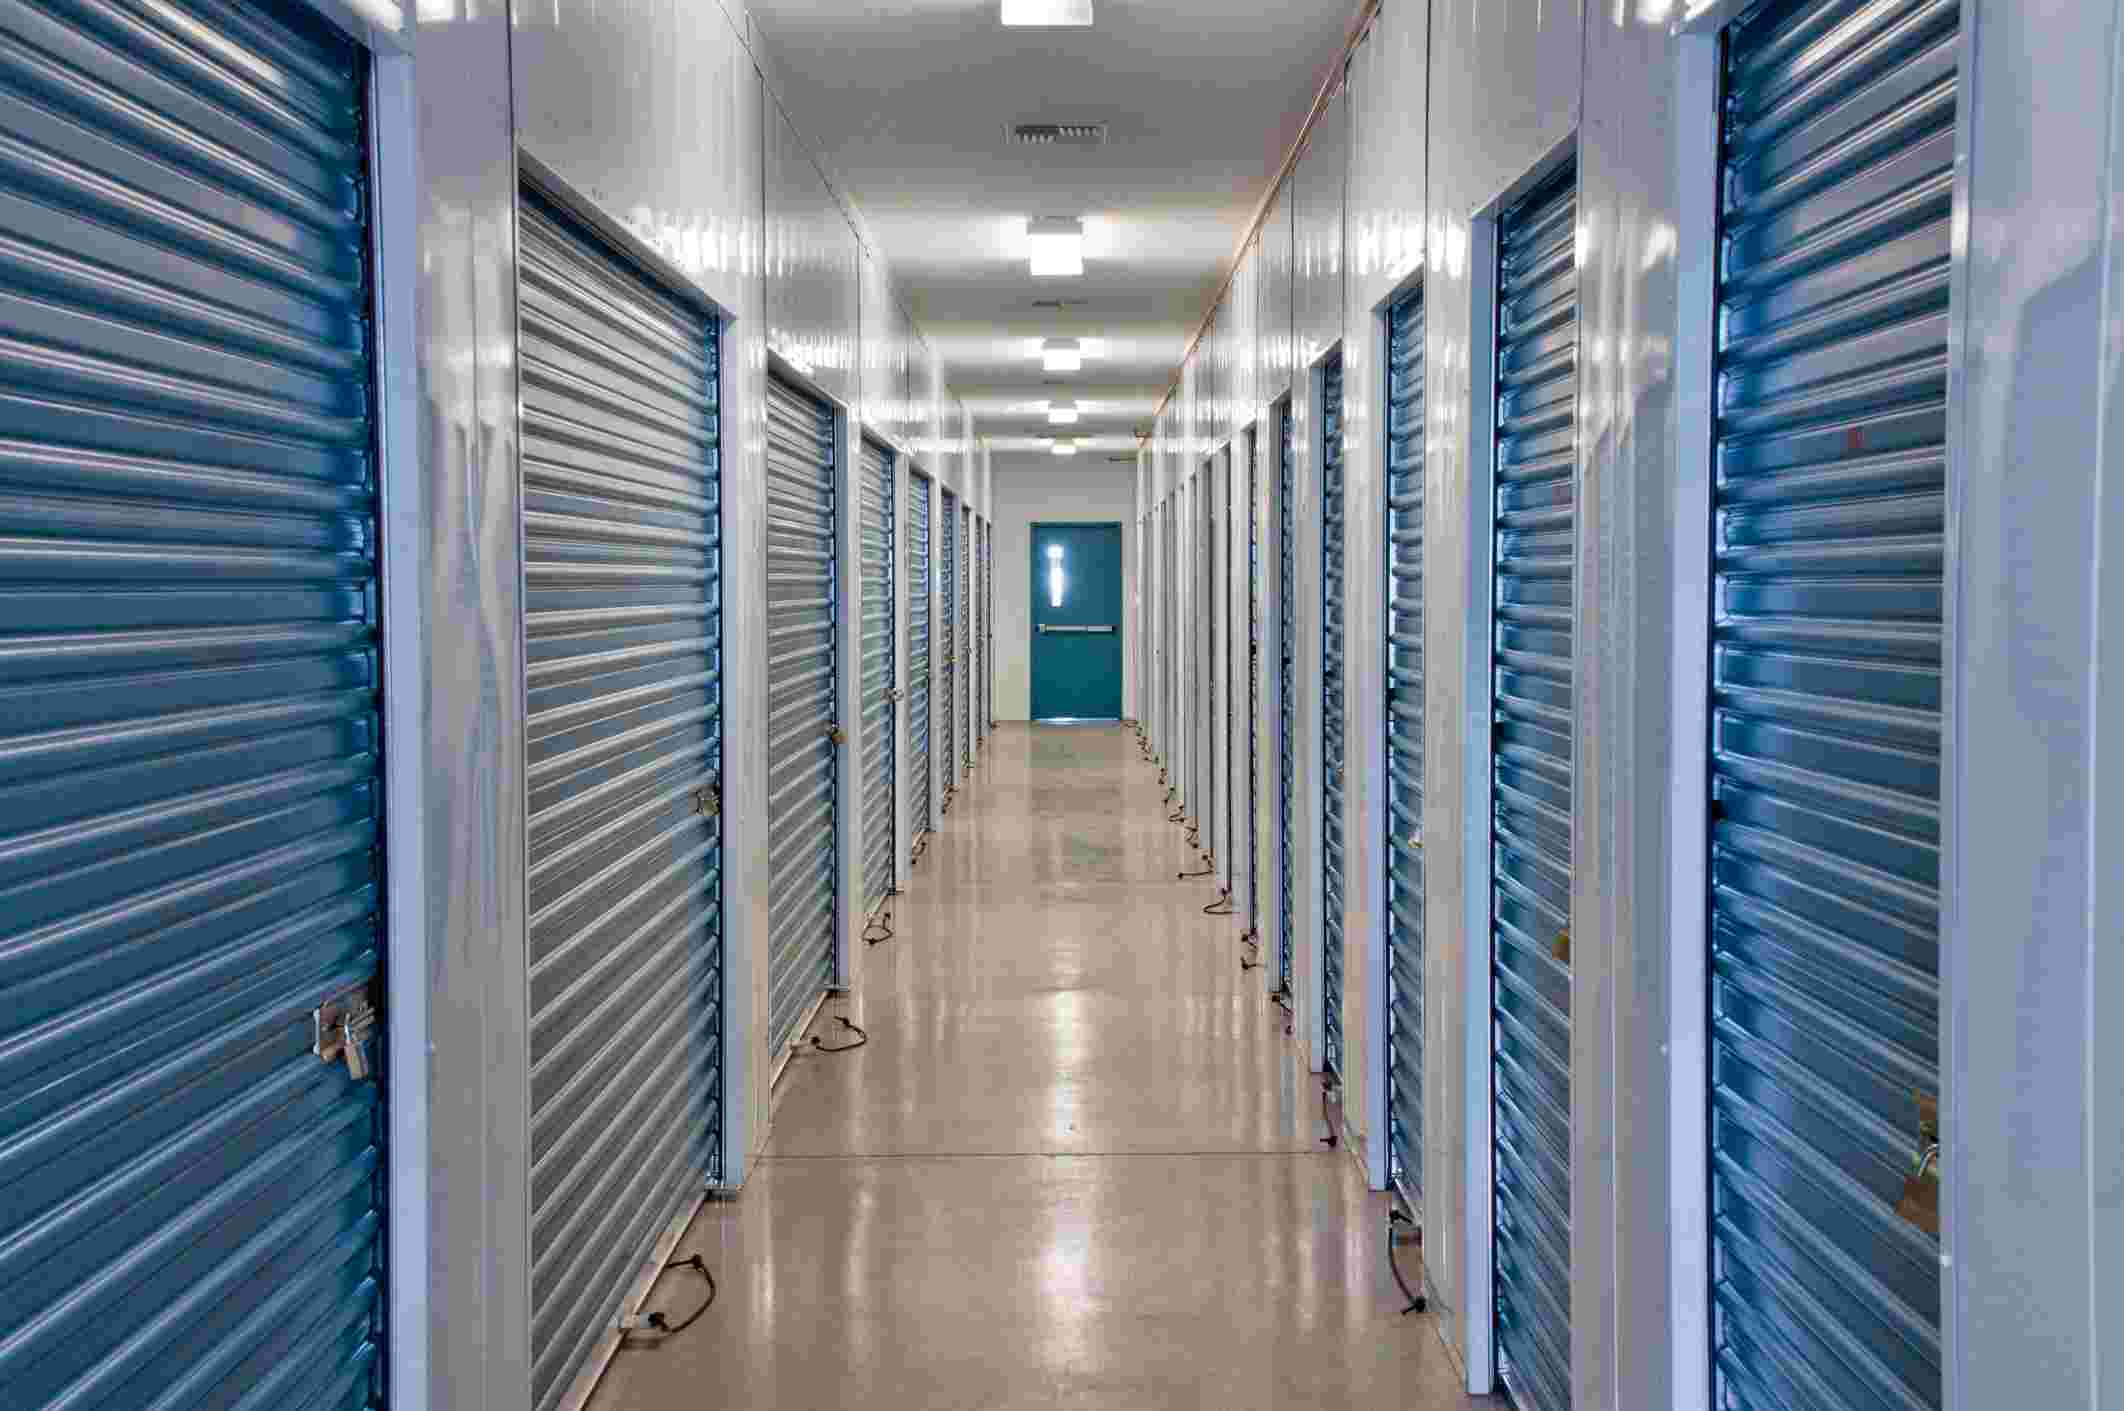 Interior of climate controlled self storage facility.